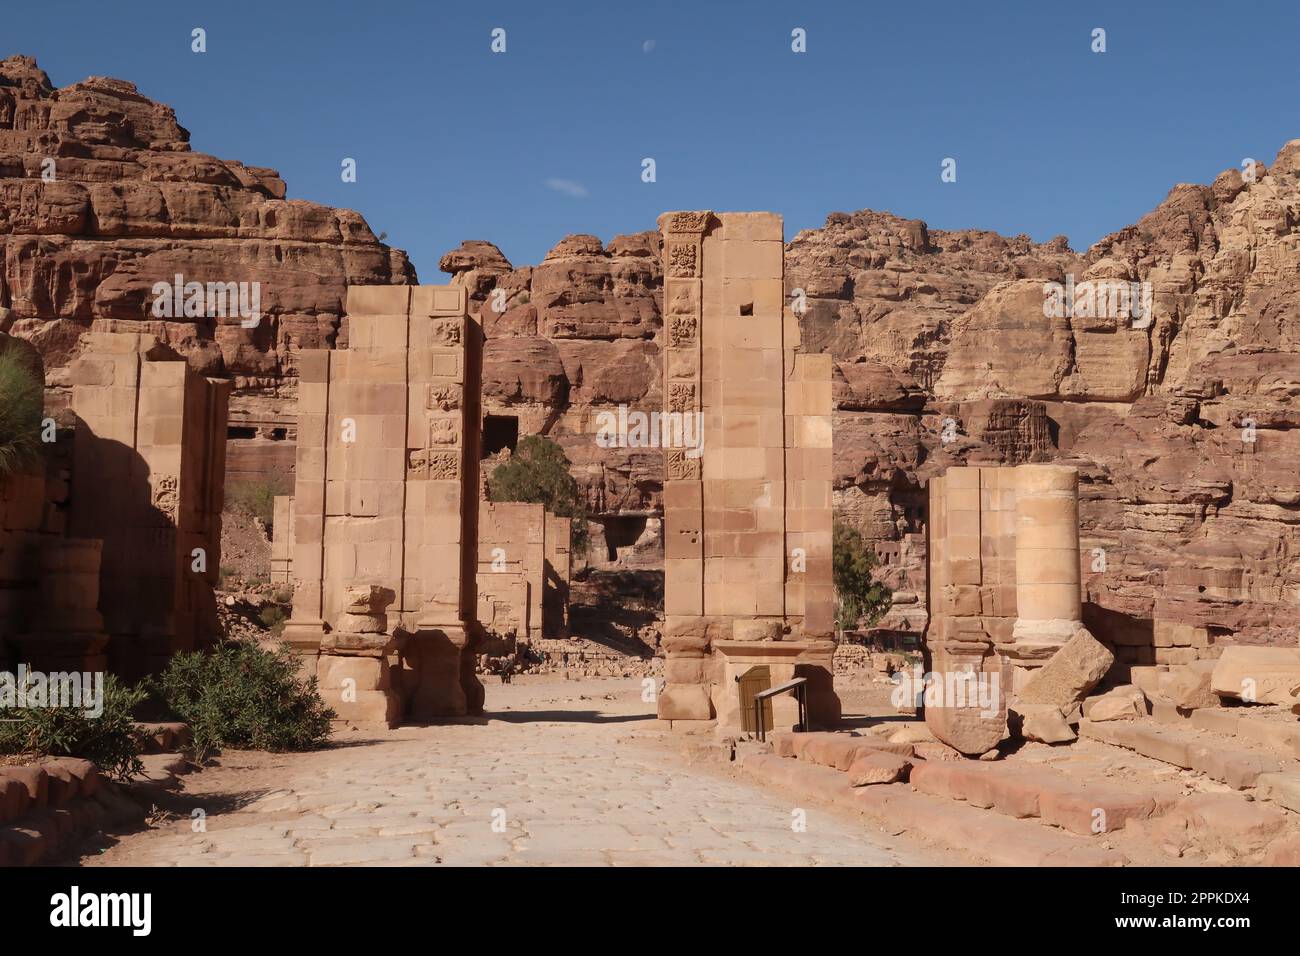 Hadrian Gate, also known as Temenos Gate in the ancient Nabataean City of Petra, Jordan Stock Photo